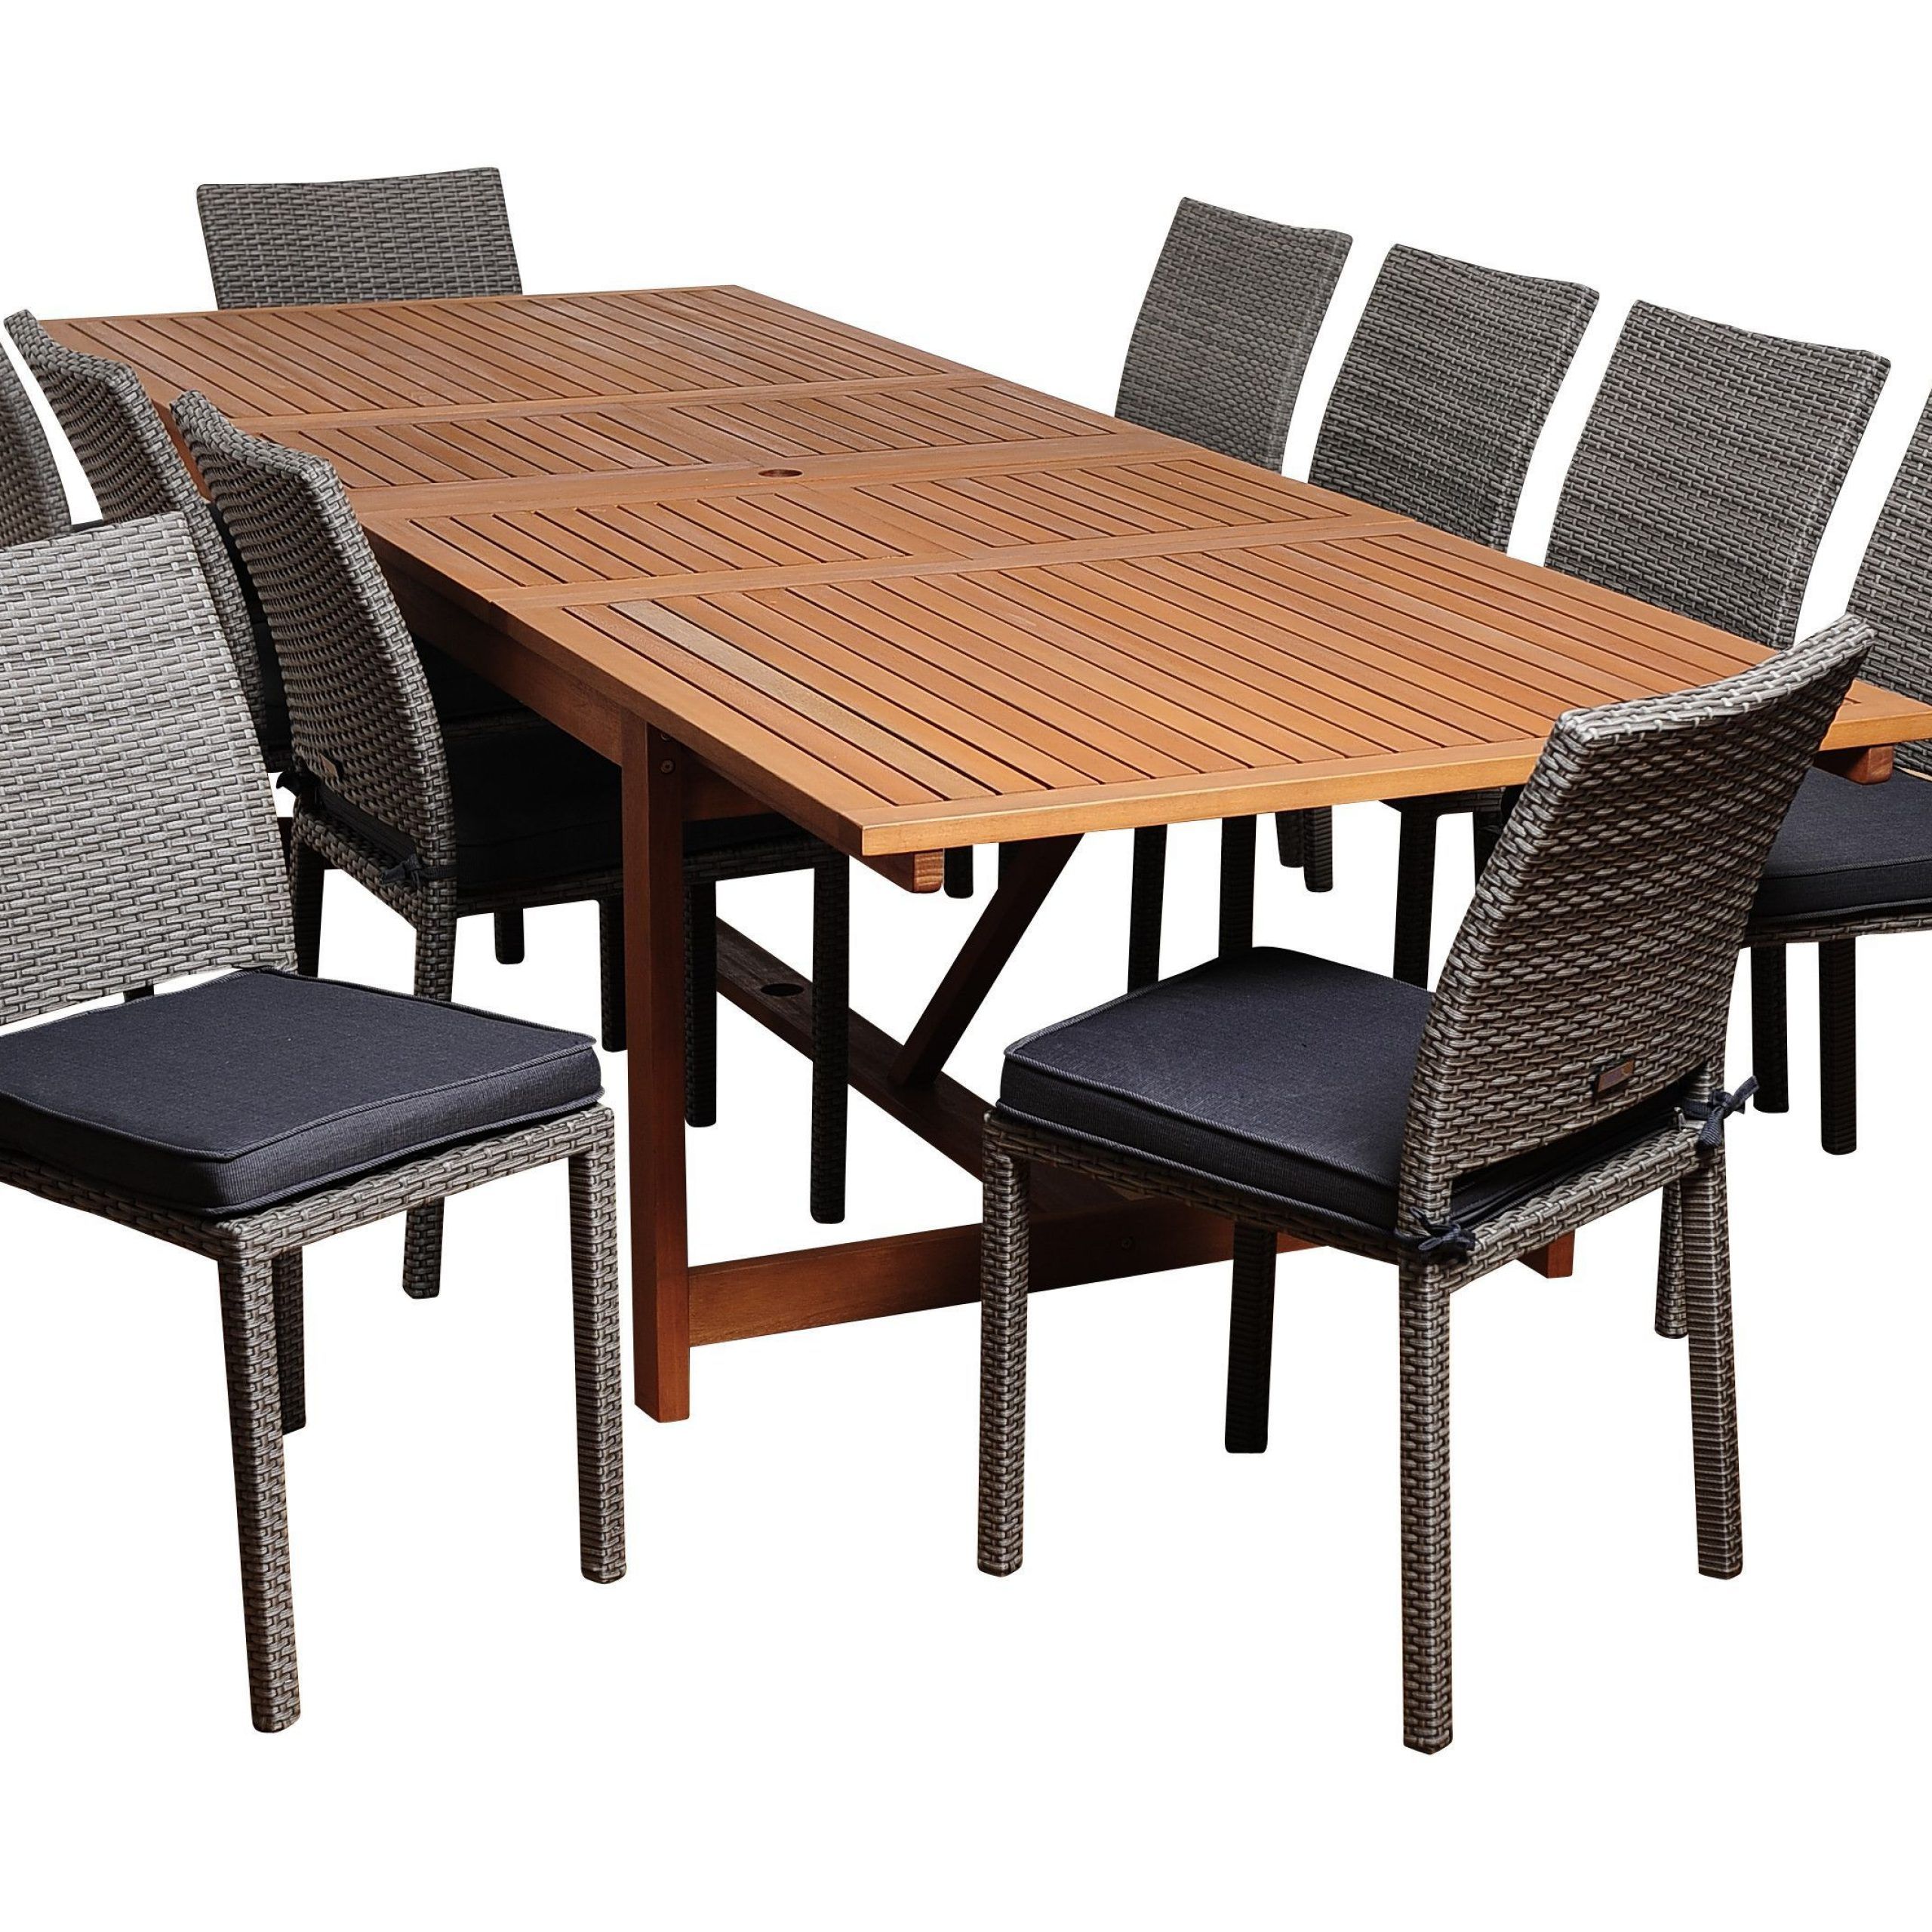 Extendable Patio Dining Set Pertaining To Fashionable Angelo 11 Piece Eucalyptus/wicker Extendable Rectangular Patio Dining (View 12 of 15)